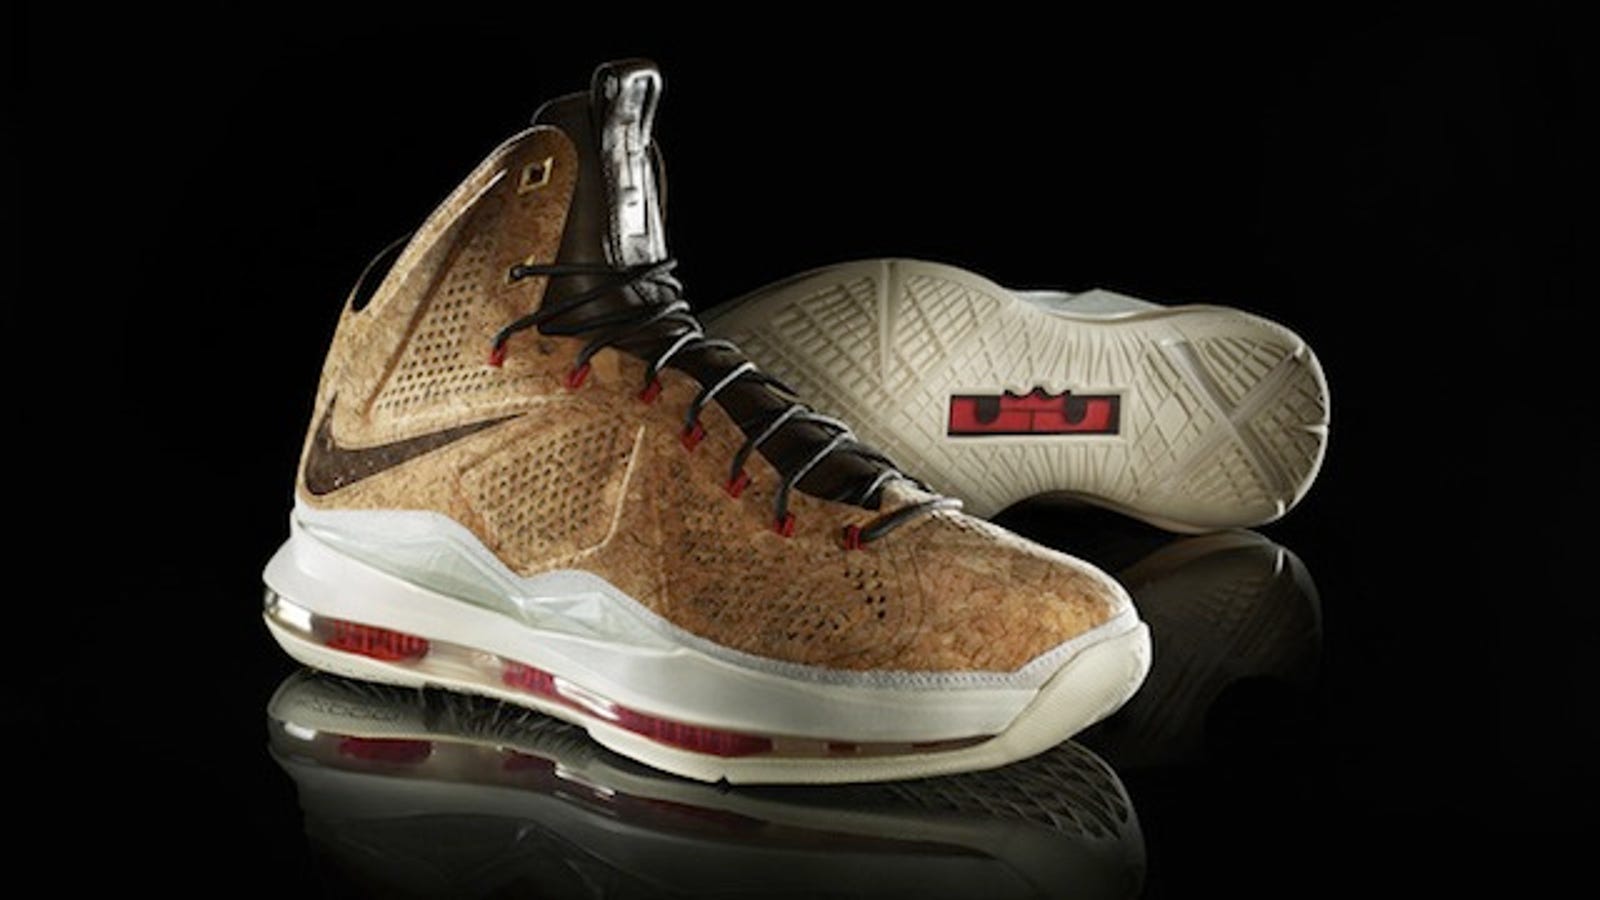 These Nike Shoes Made Out of Cork Are a Cause for Celebration